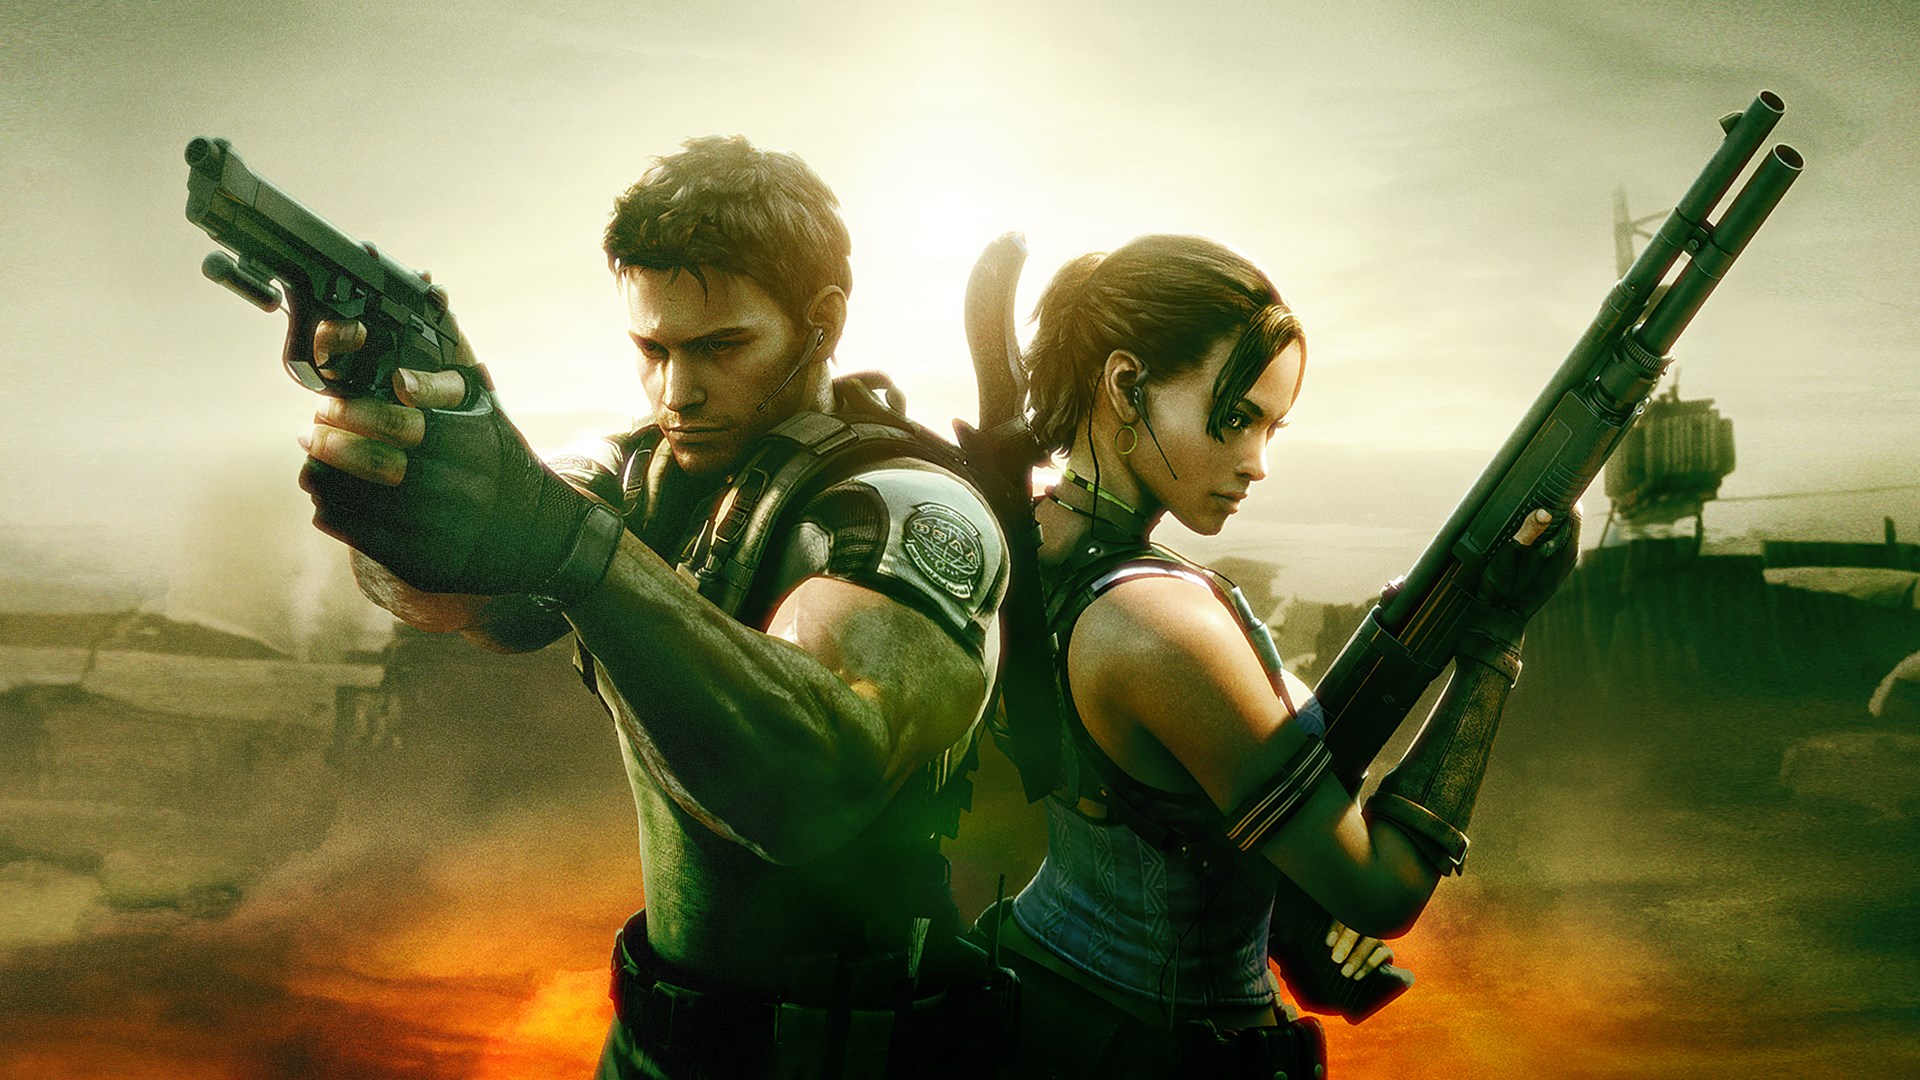 Resident Evil 5 Review - Re-Released For All The Wrong Reasons